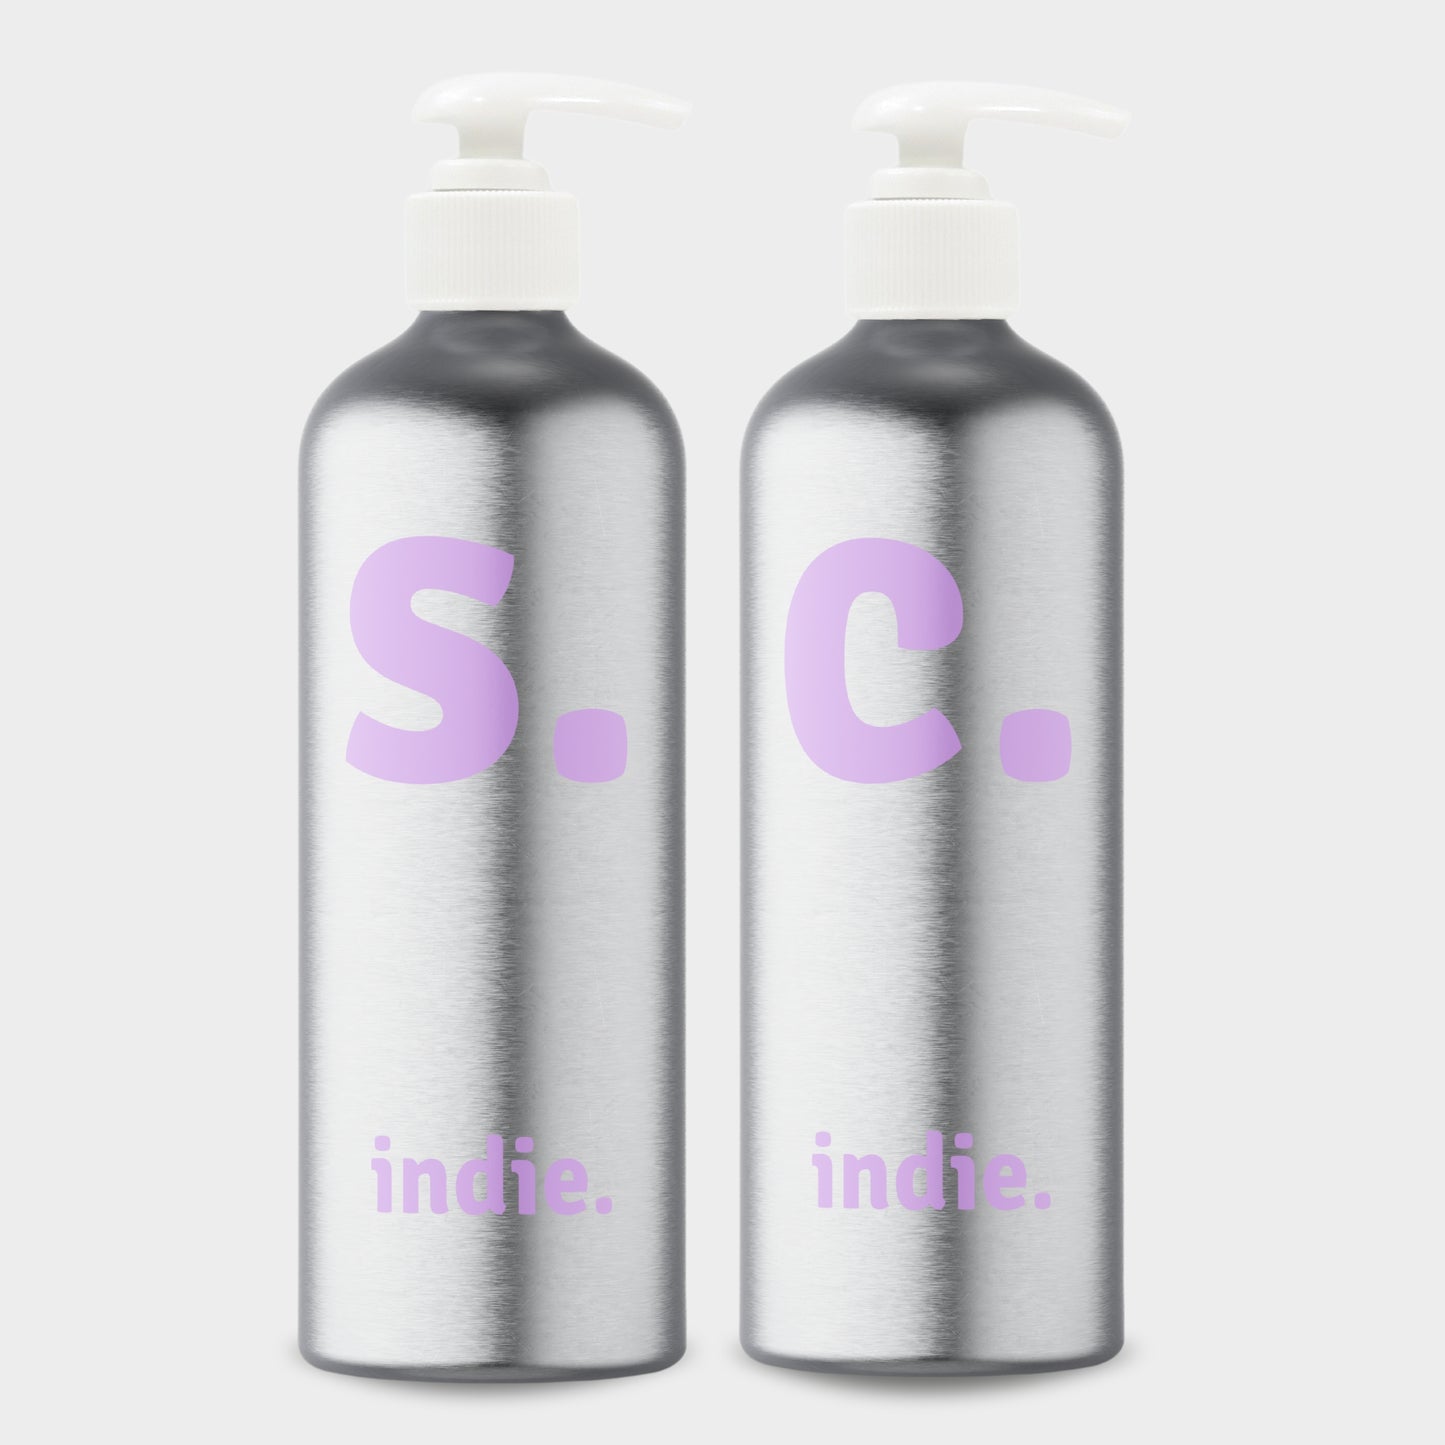 Refillable Shampoo & Conditioner Bottle Duo